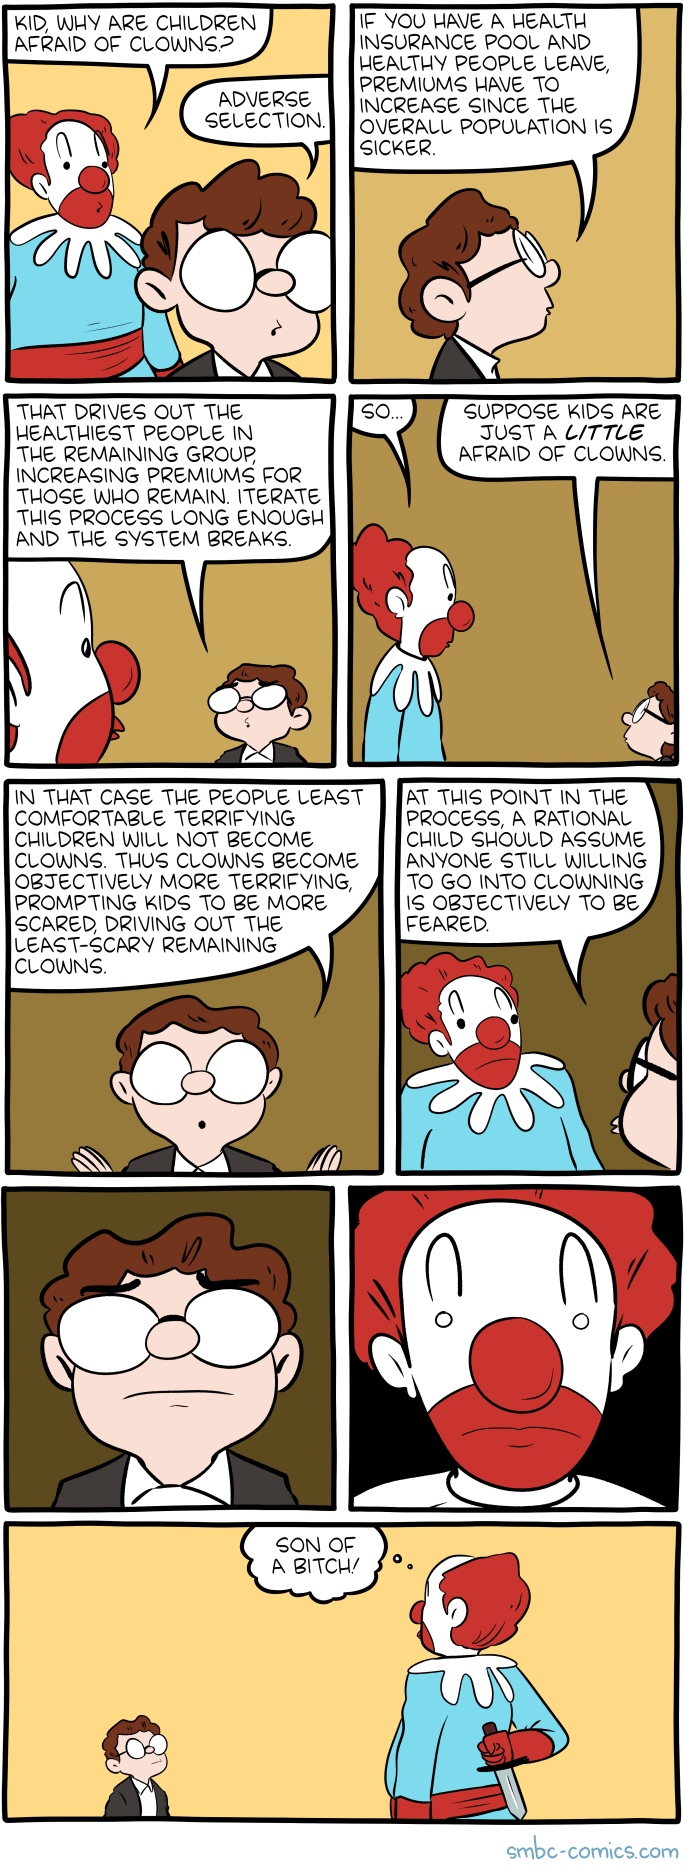 I'm just here in the hopes that the standard college explainer comic on adverse selection involves clown murder.